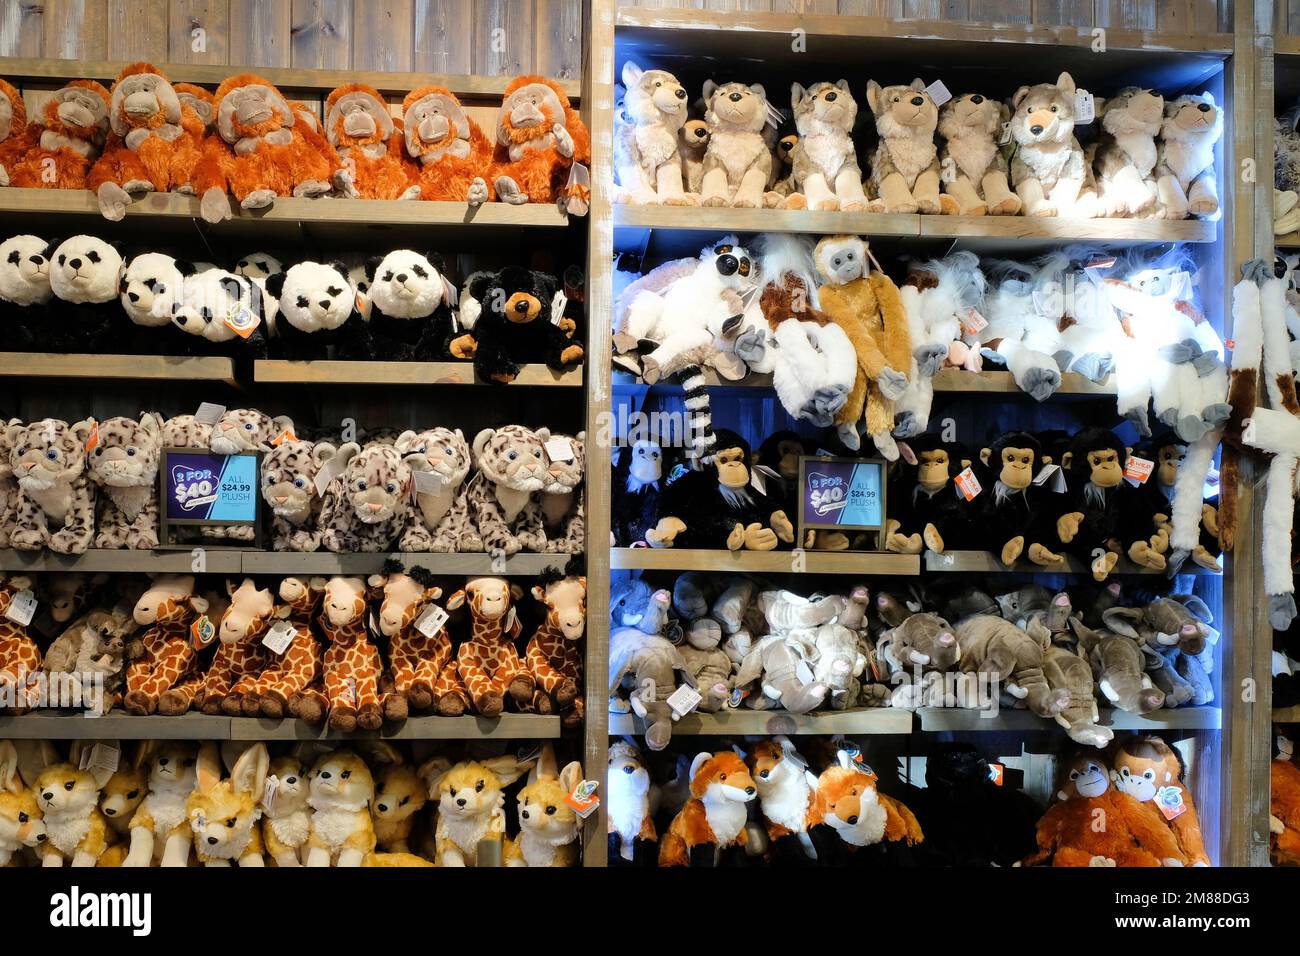 Zoo gift store shelves displaying plush animals: stuffed animals on display; gift shop souvenirs for zoo patrons and visitors. Stock Photo